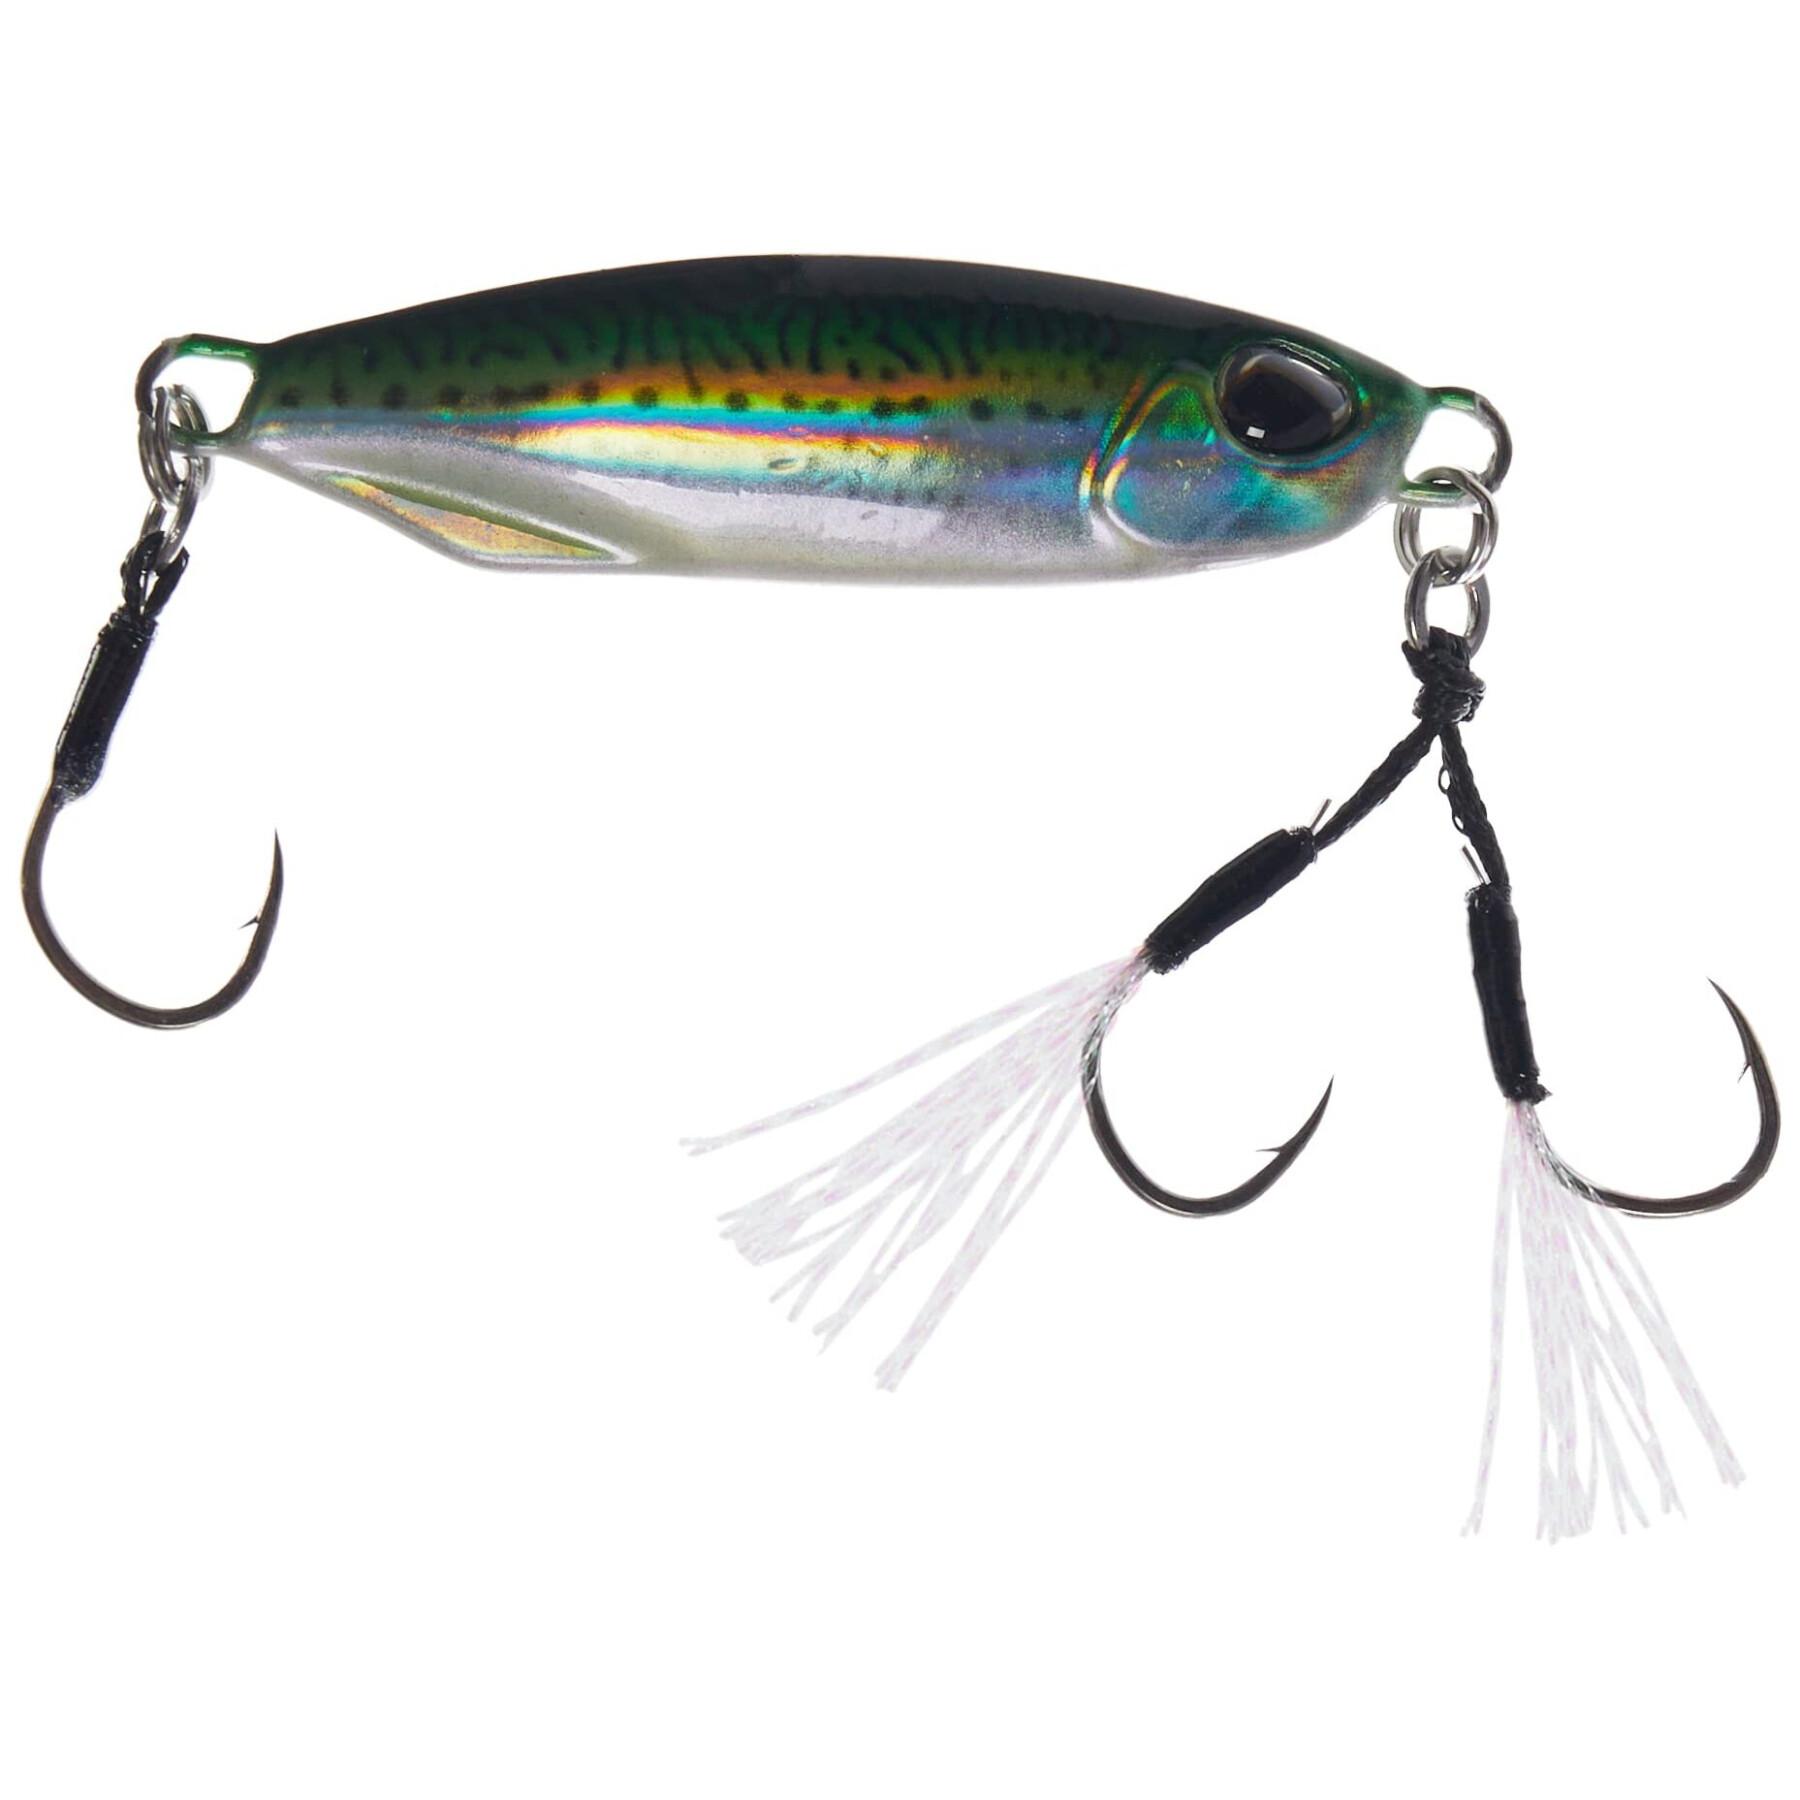 Drag metal cast slow duo lure - 40g